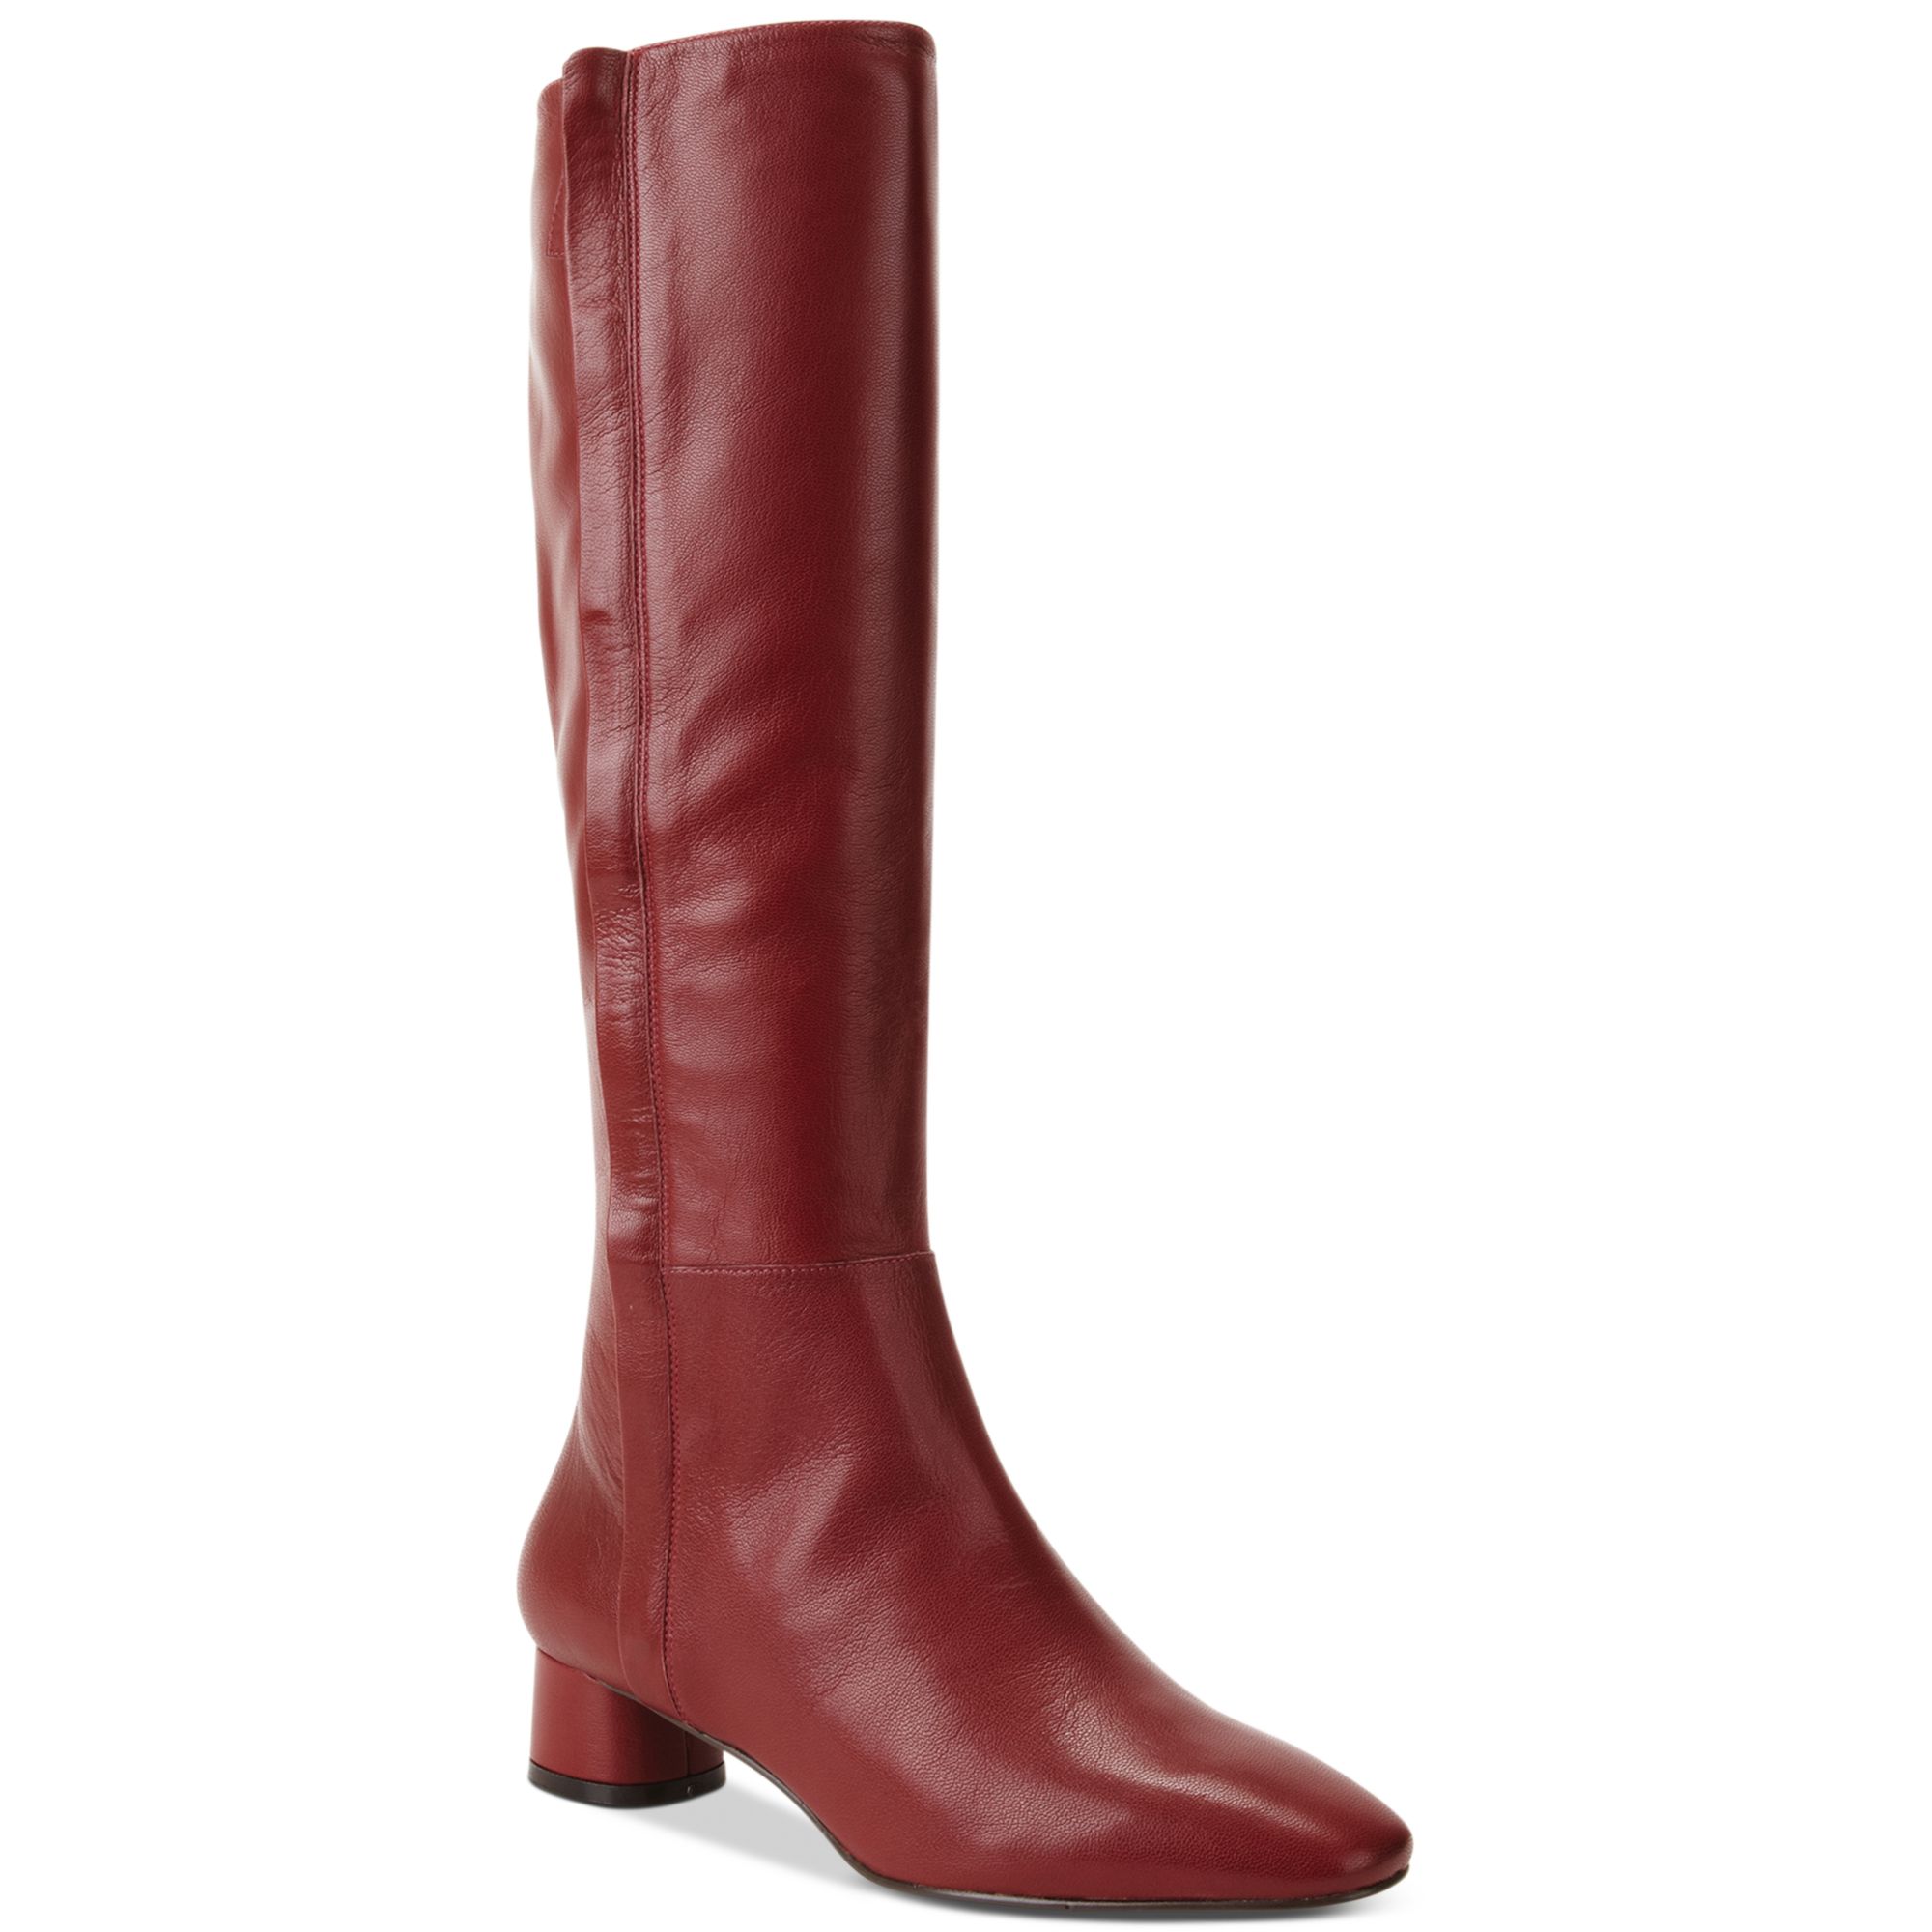 Nine West Nicoh Low Heel Tall Boots in 